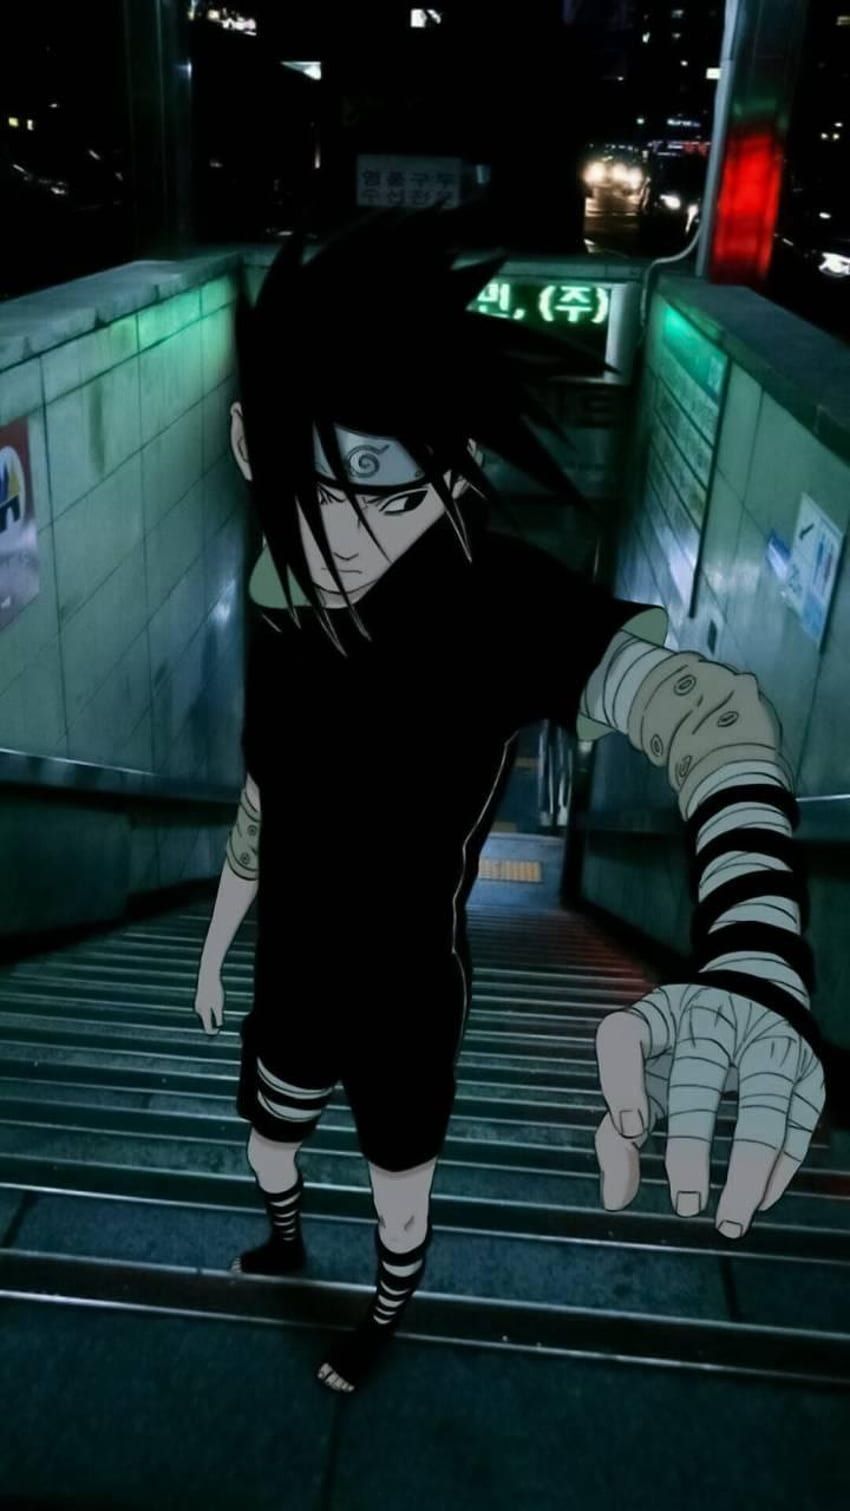 A person in black clothes with anime eyes - Sasuke Uchiha